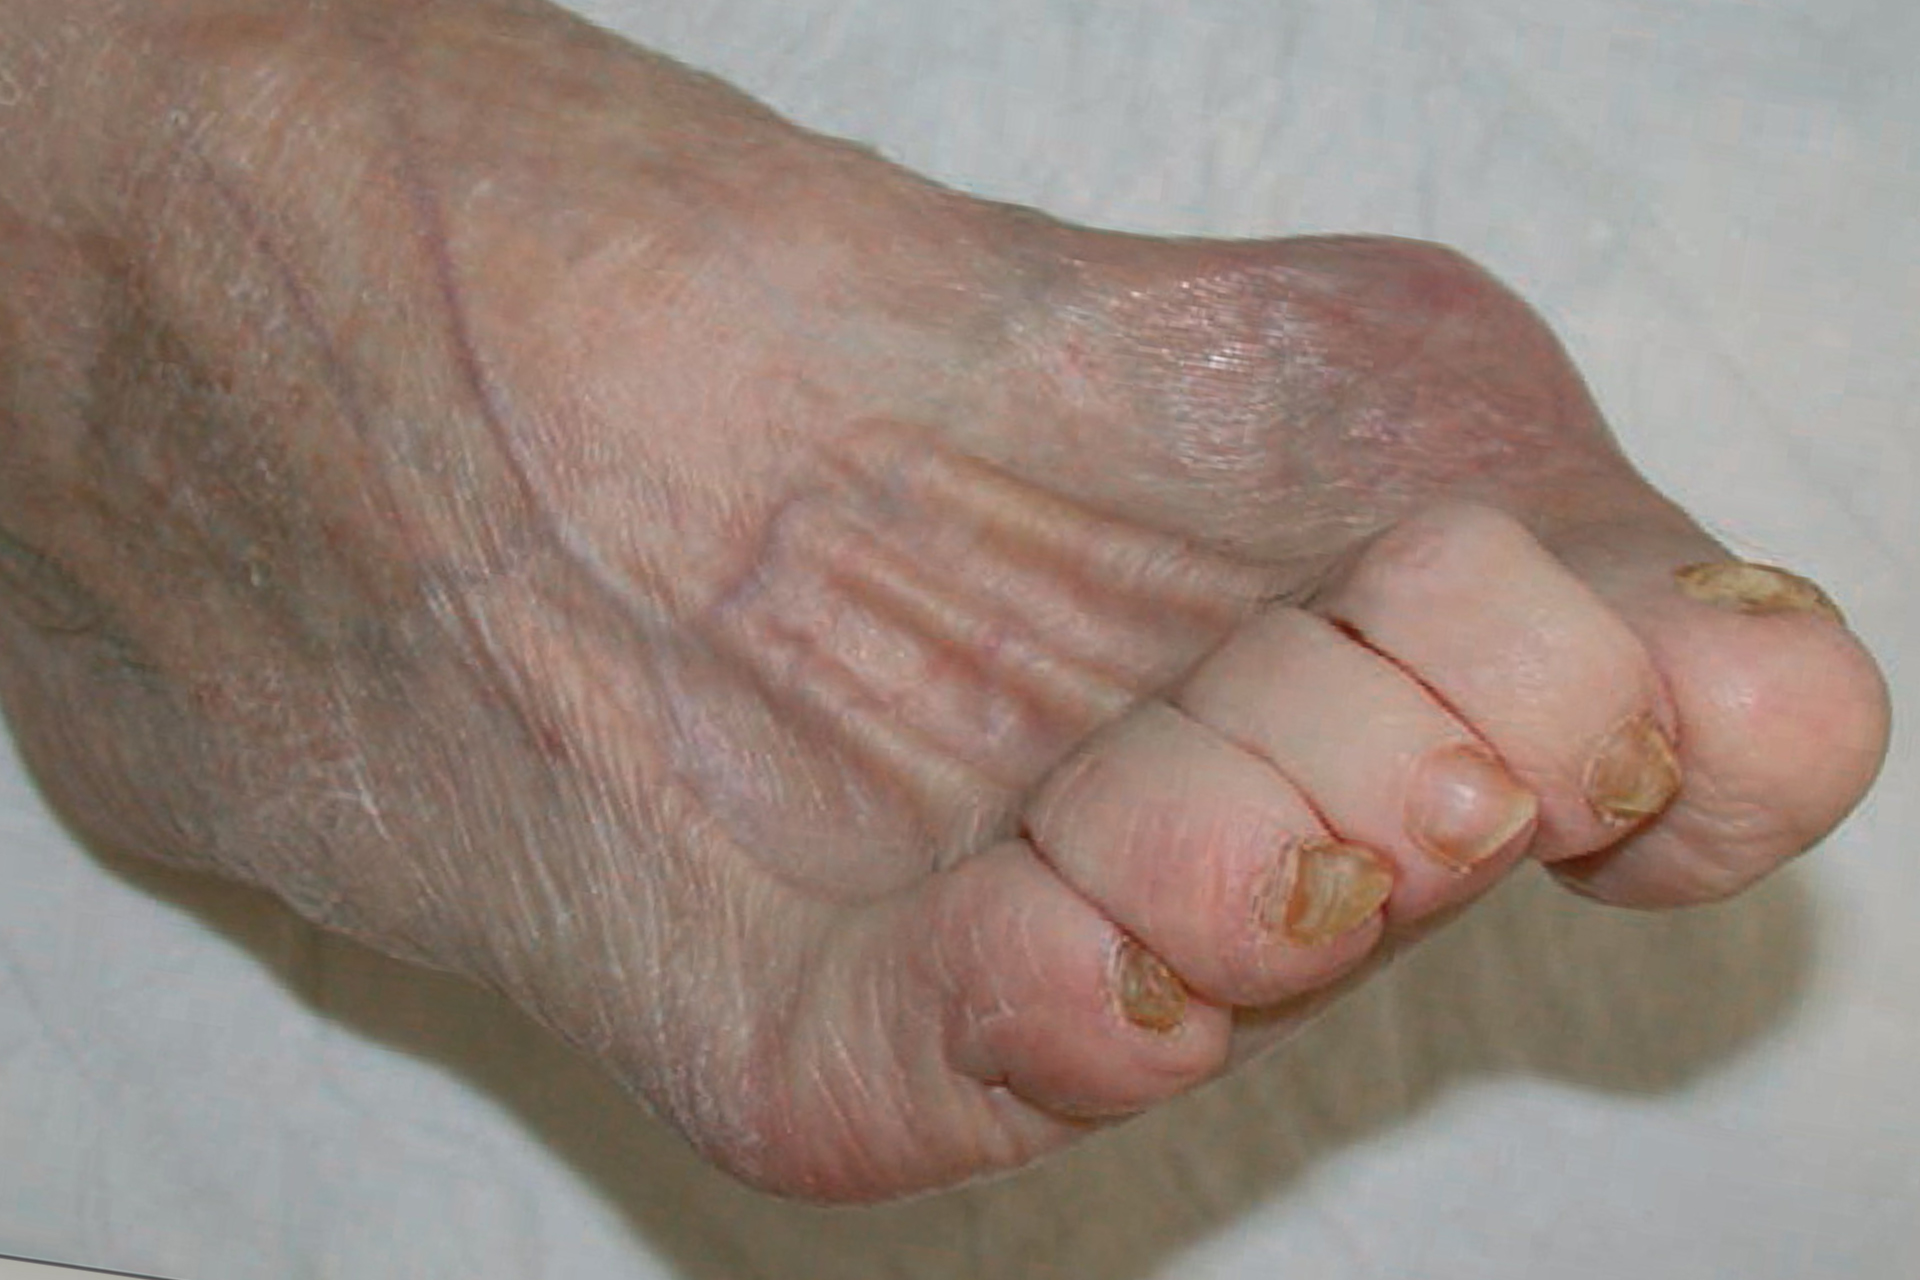 diabetic foot infection Charcot neuropathy